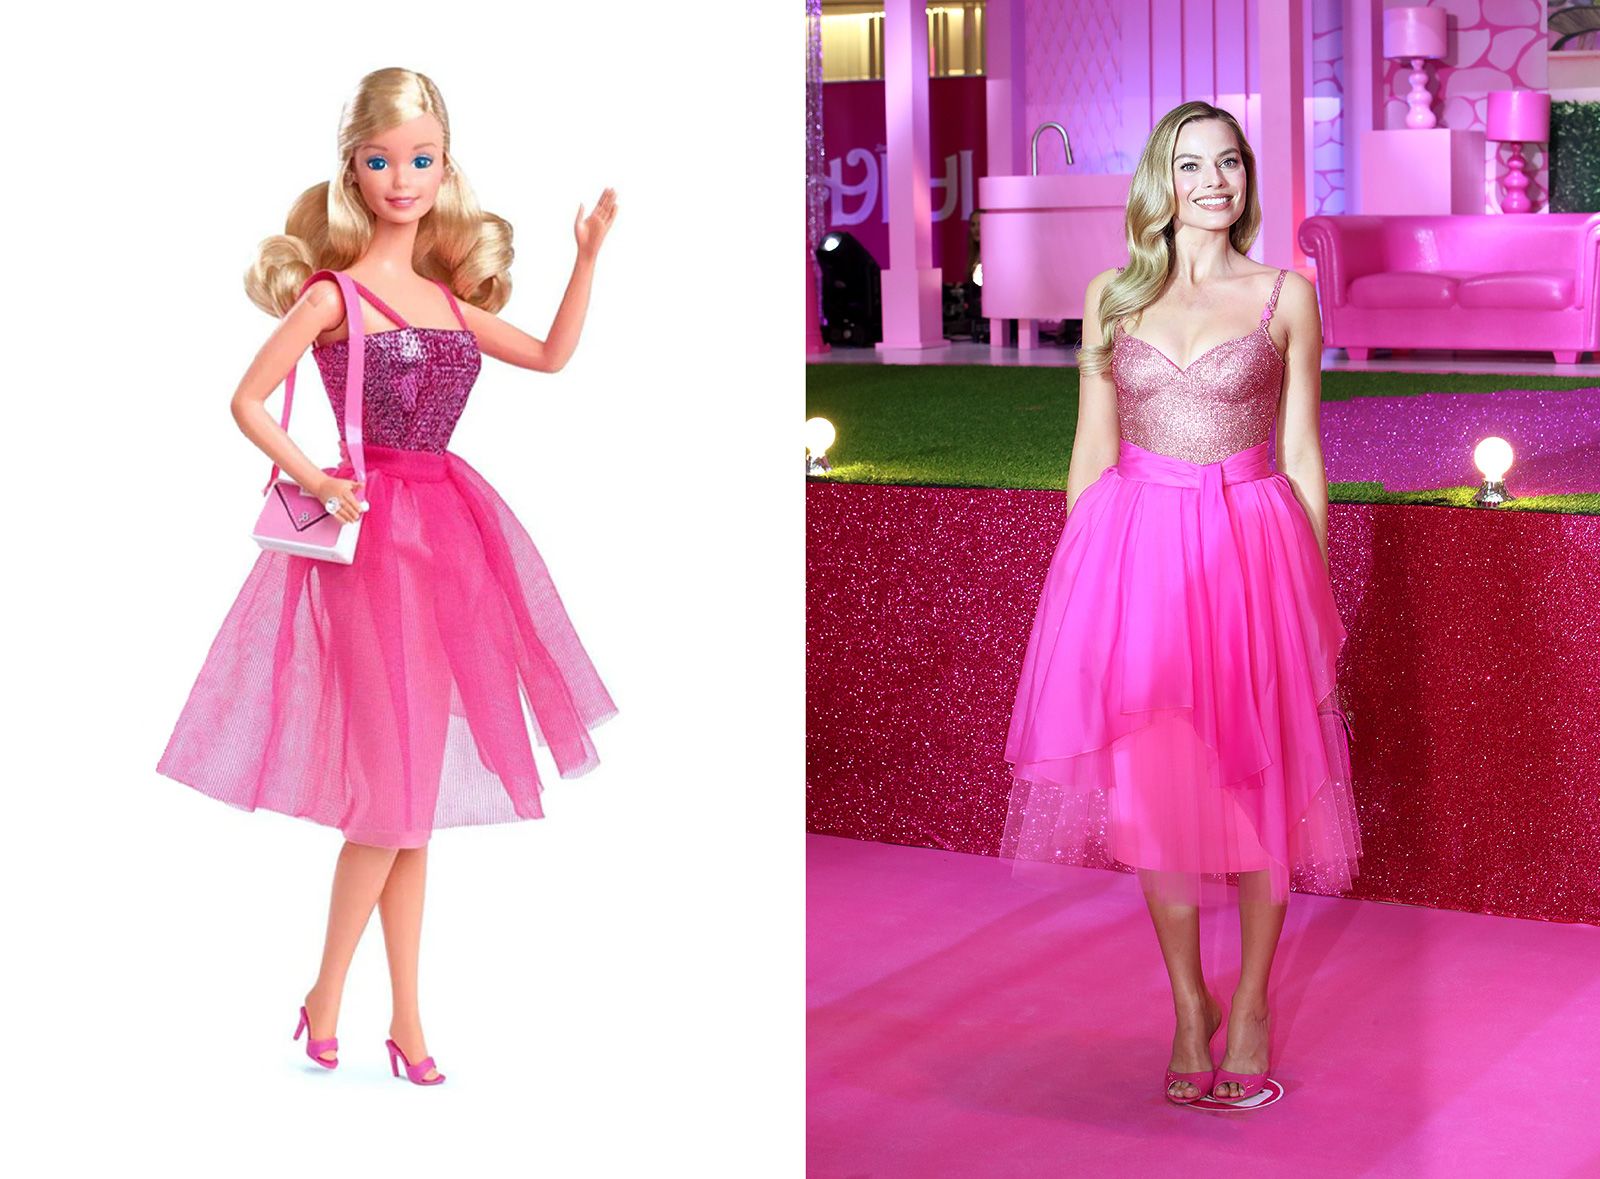 Every Must-See Fashion Moment From the Barbie Press Tour